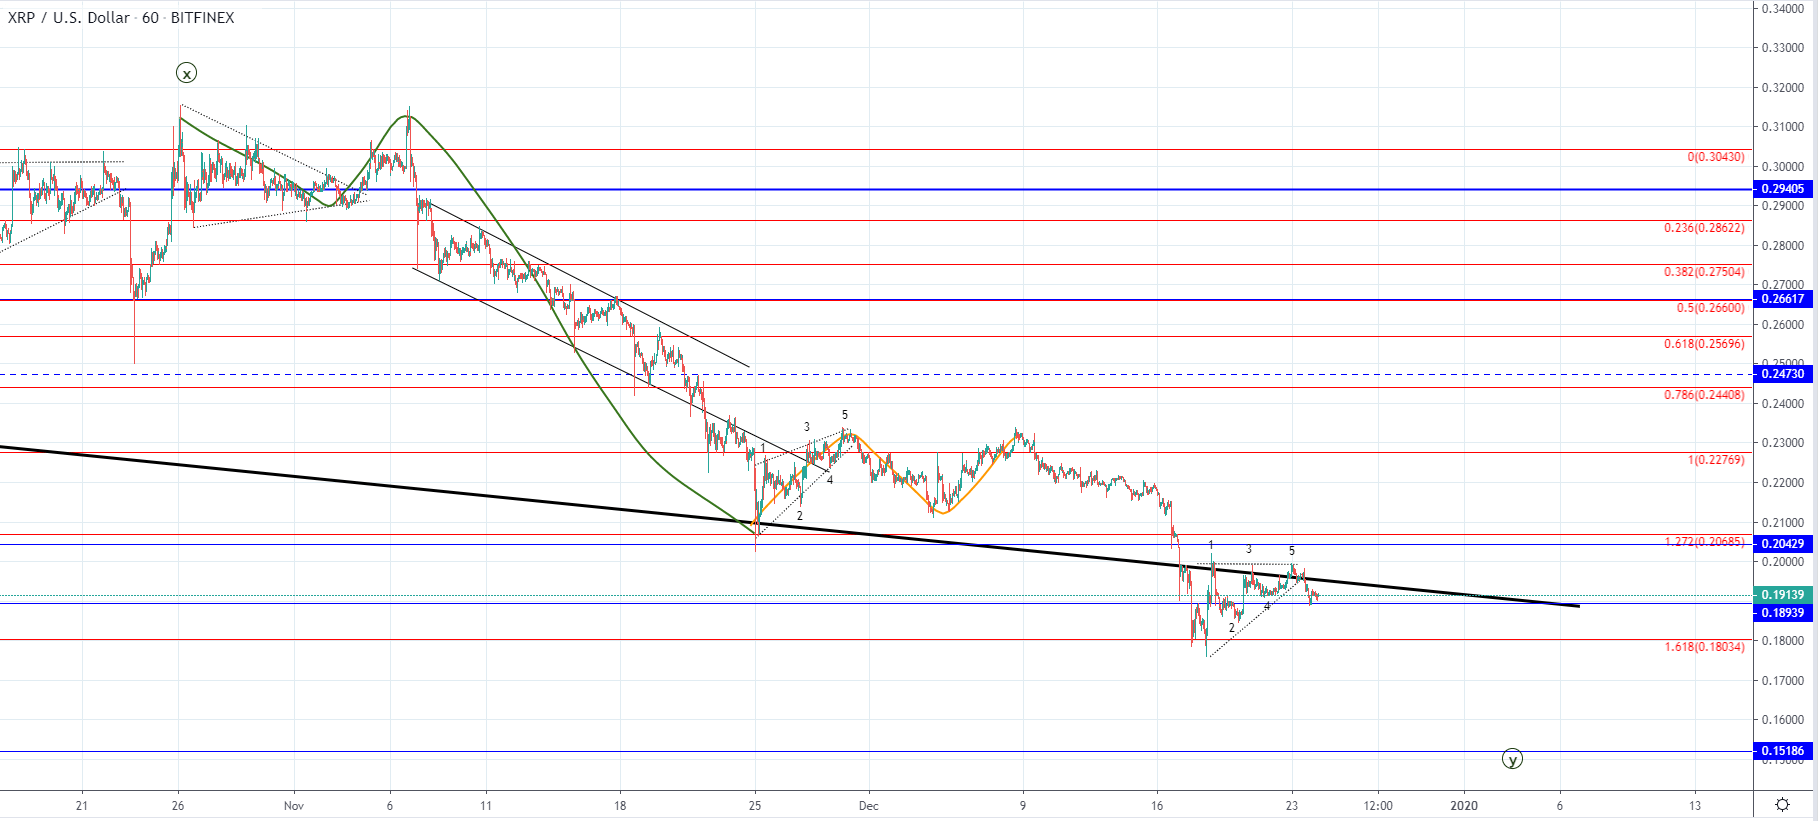 BTC and XRP - Increase could be corrective